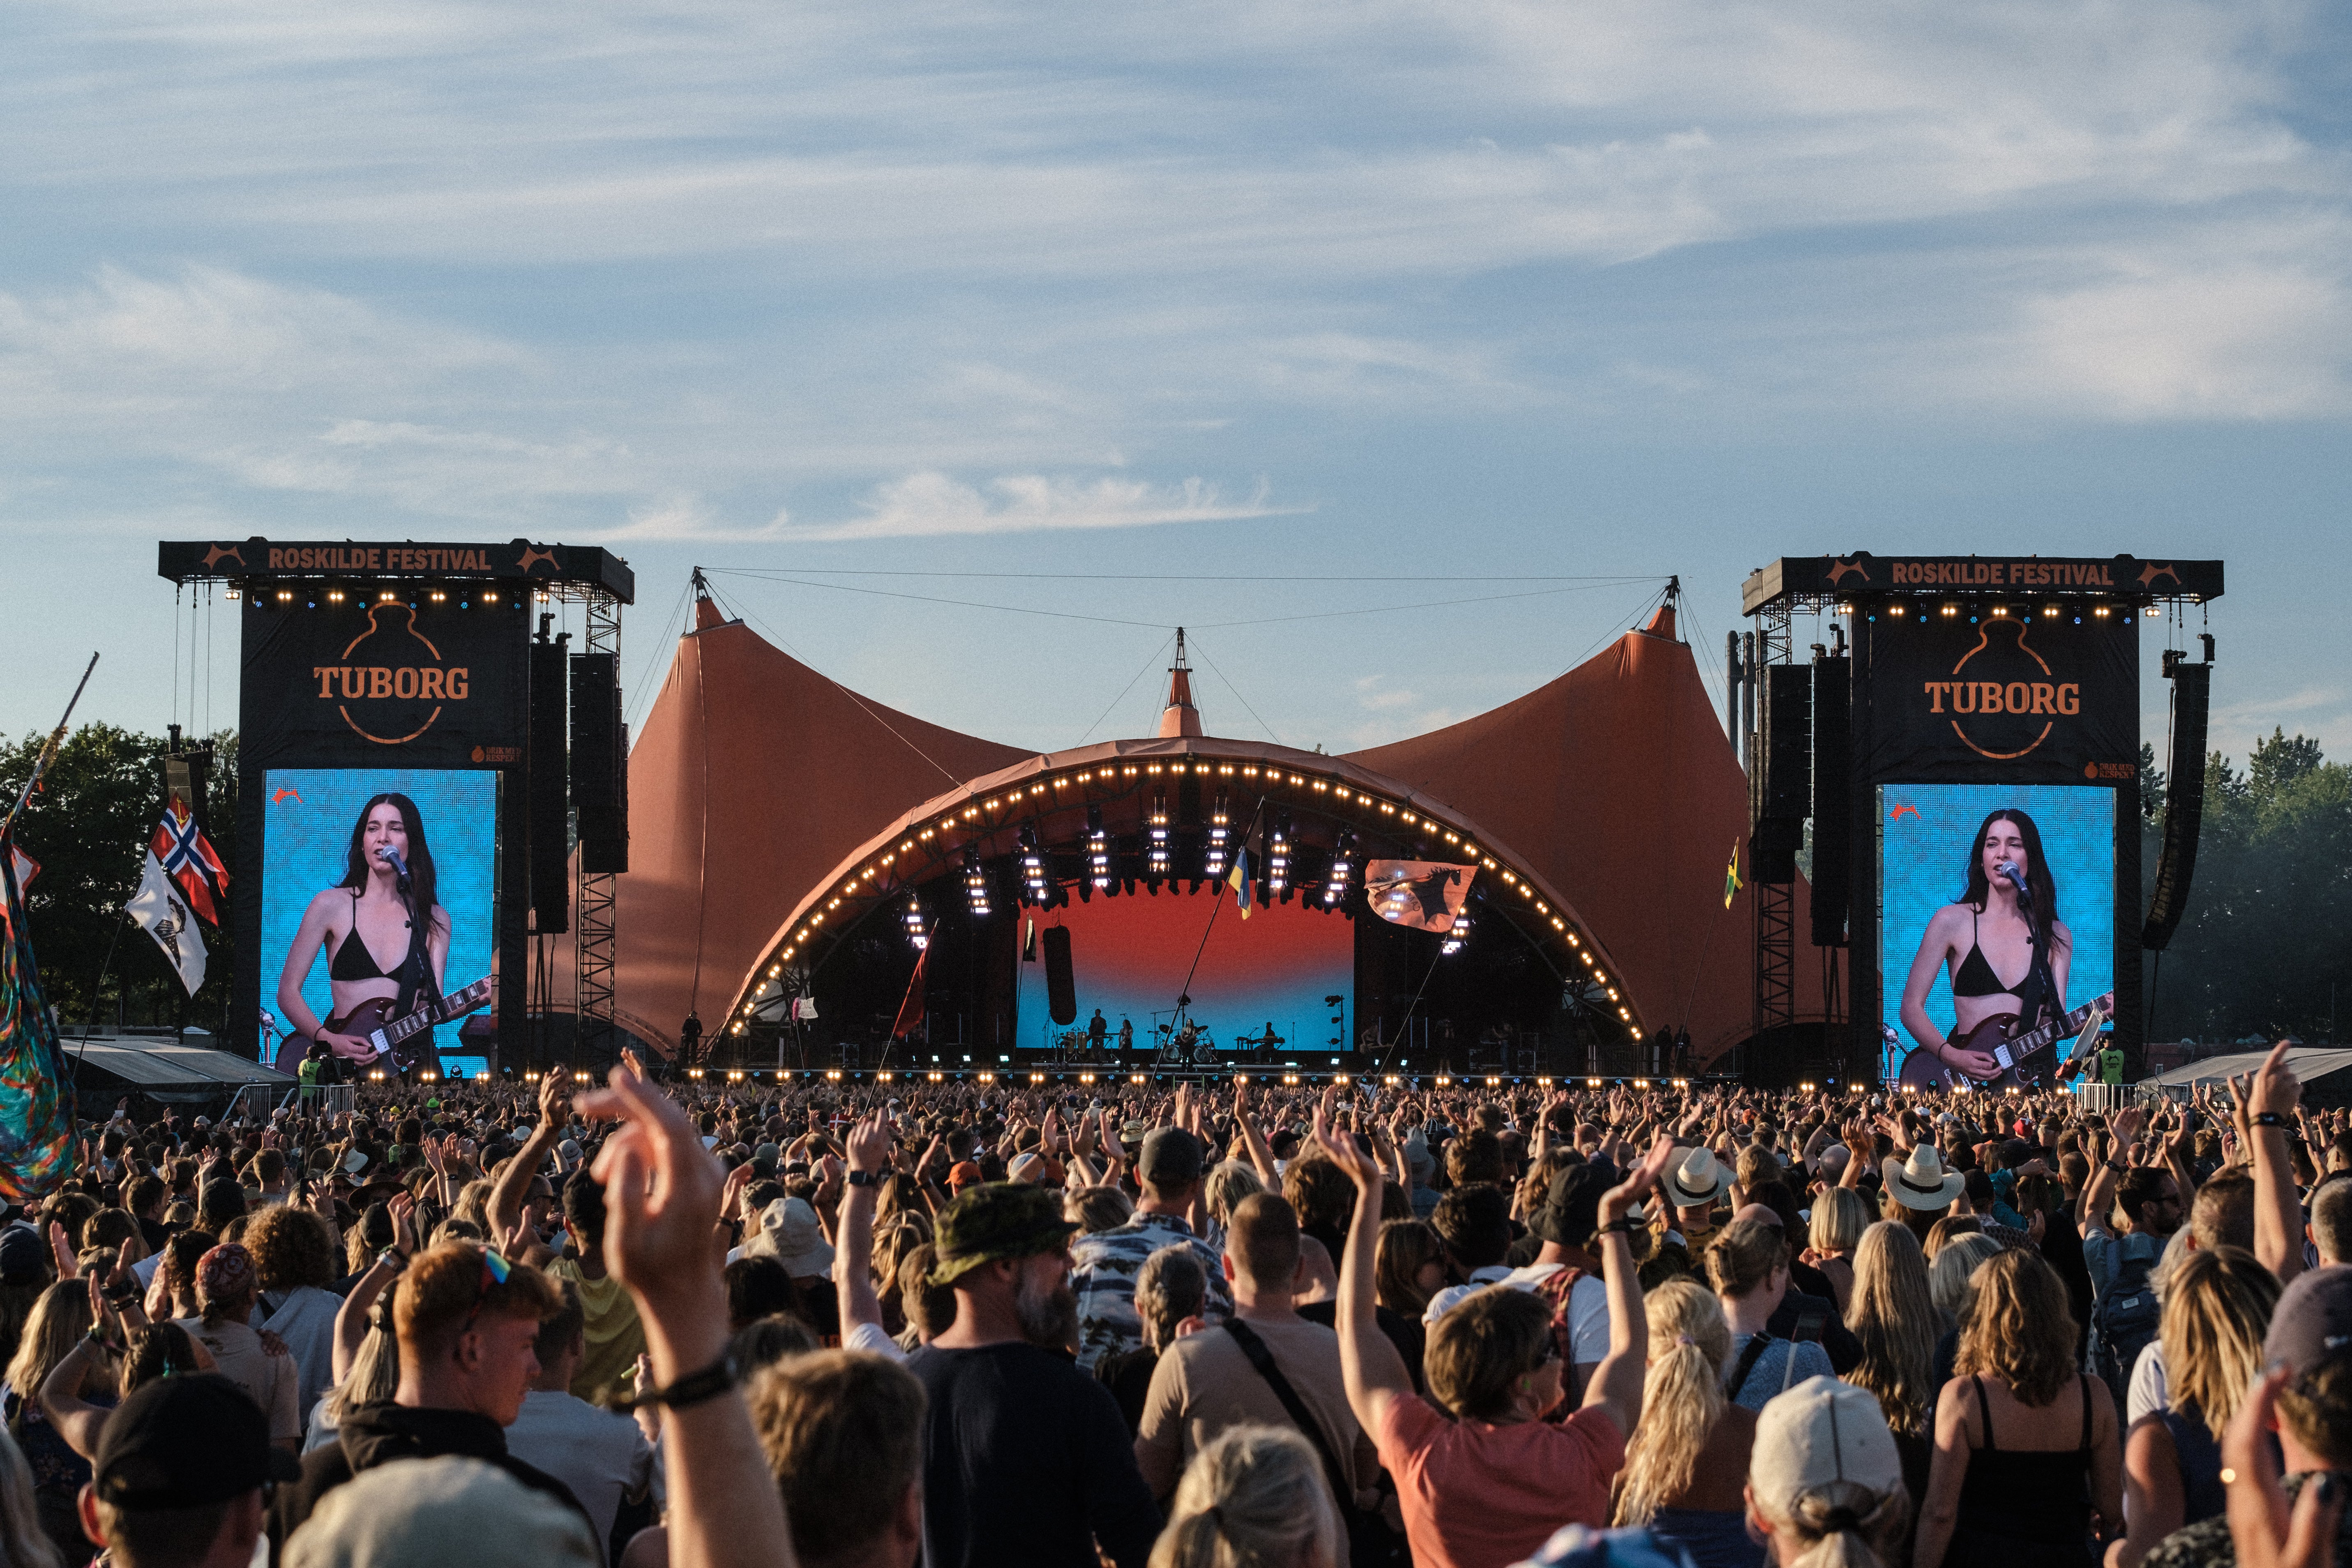 The Orange Stage at Roskilde